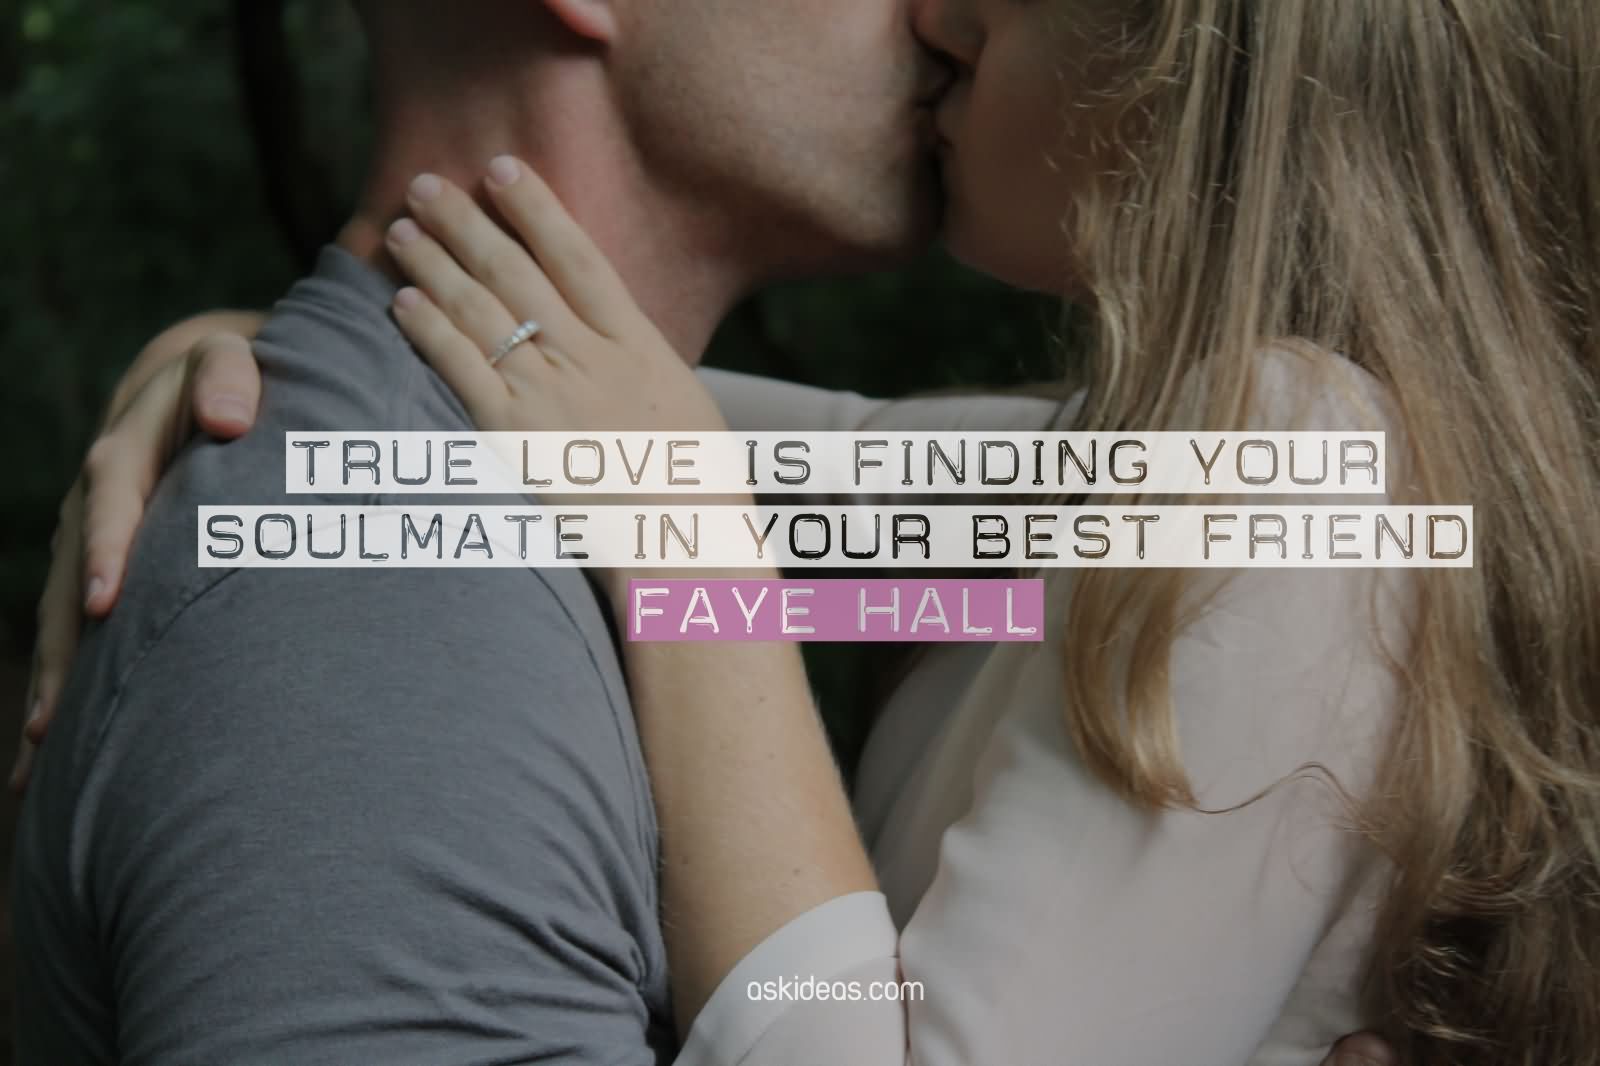 True love is finding your soulmate in your best friend.